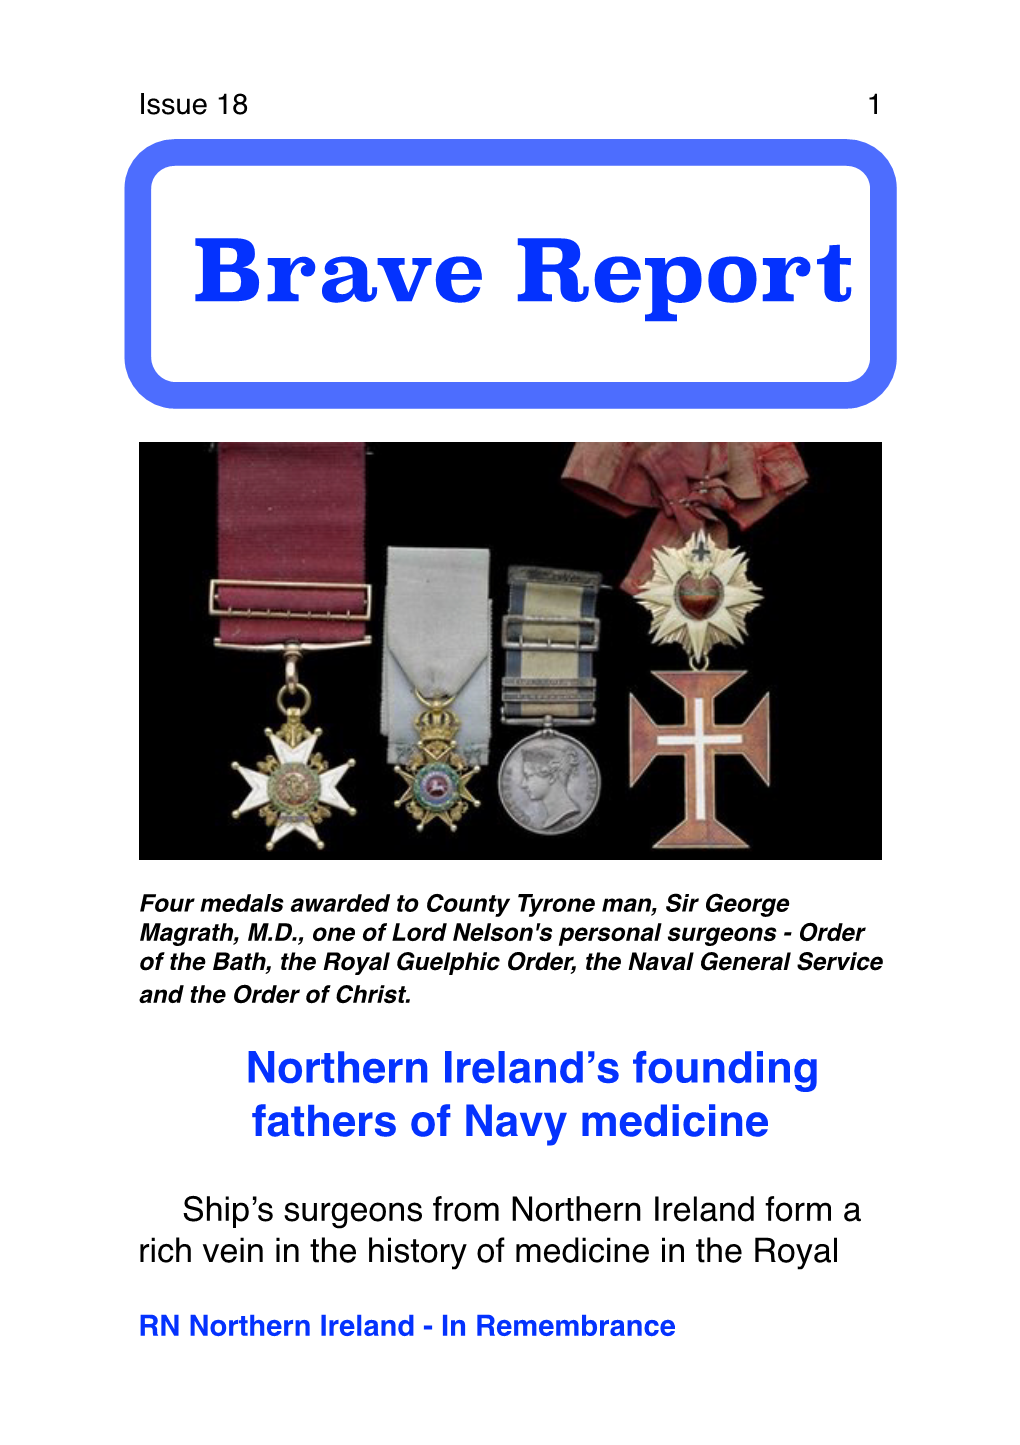 Brave Report Issue 18 MEDICAL 1